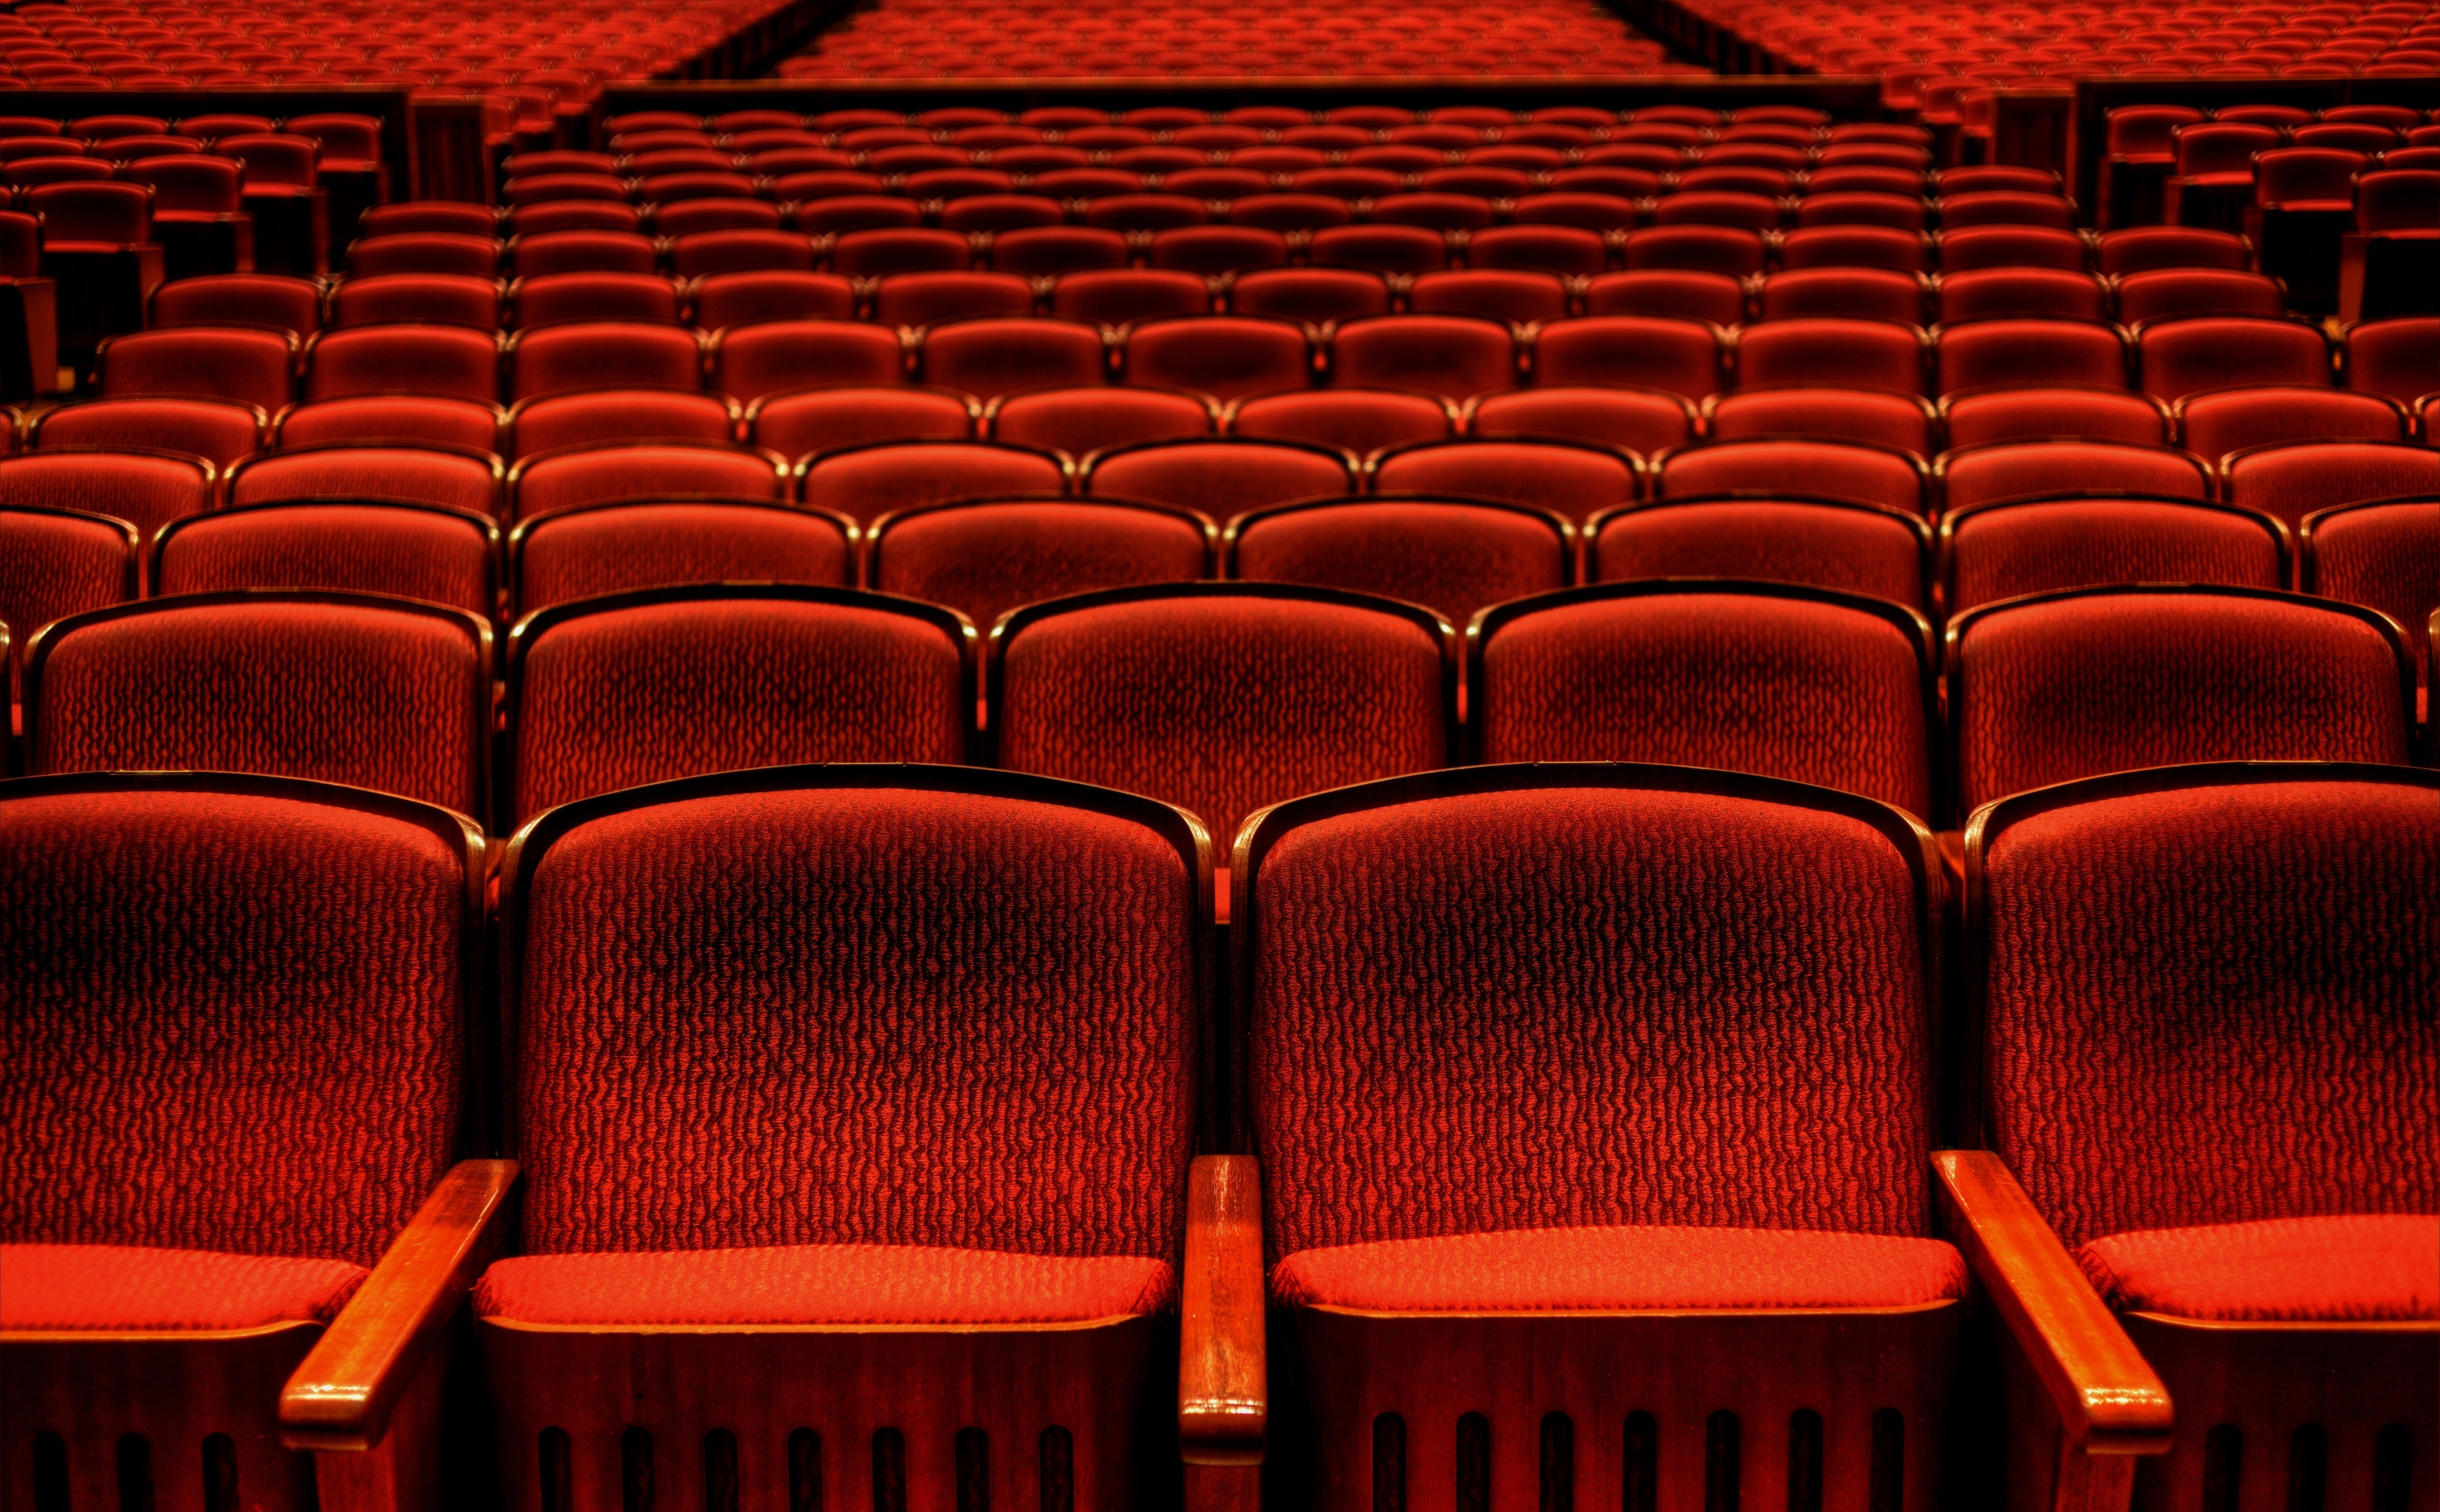 Red Theater Seats, red corduroy cinema chairs, Architecture, Japan